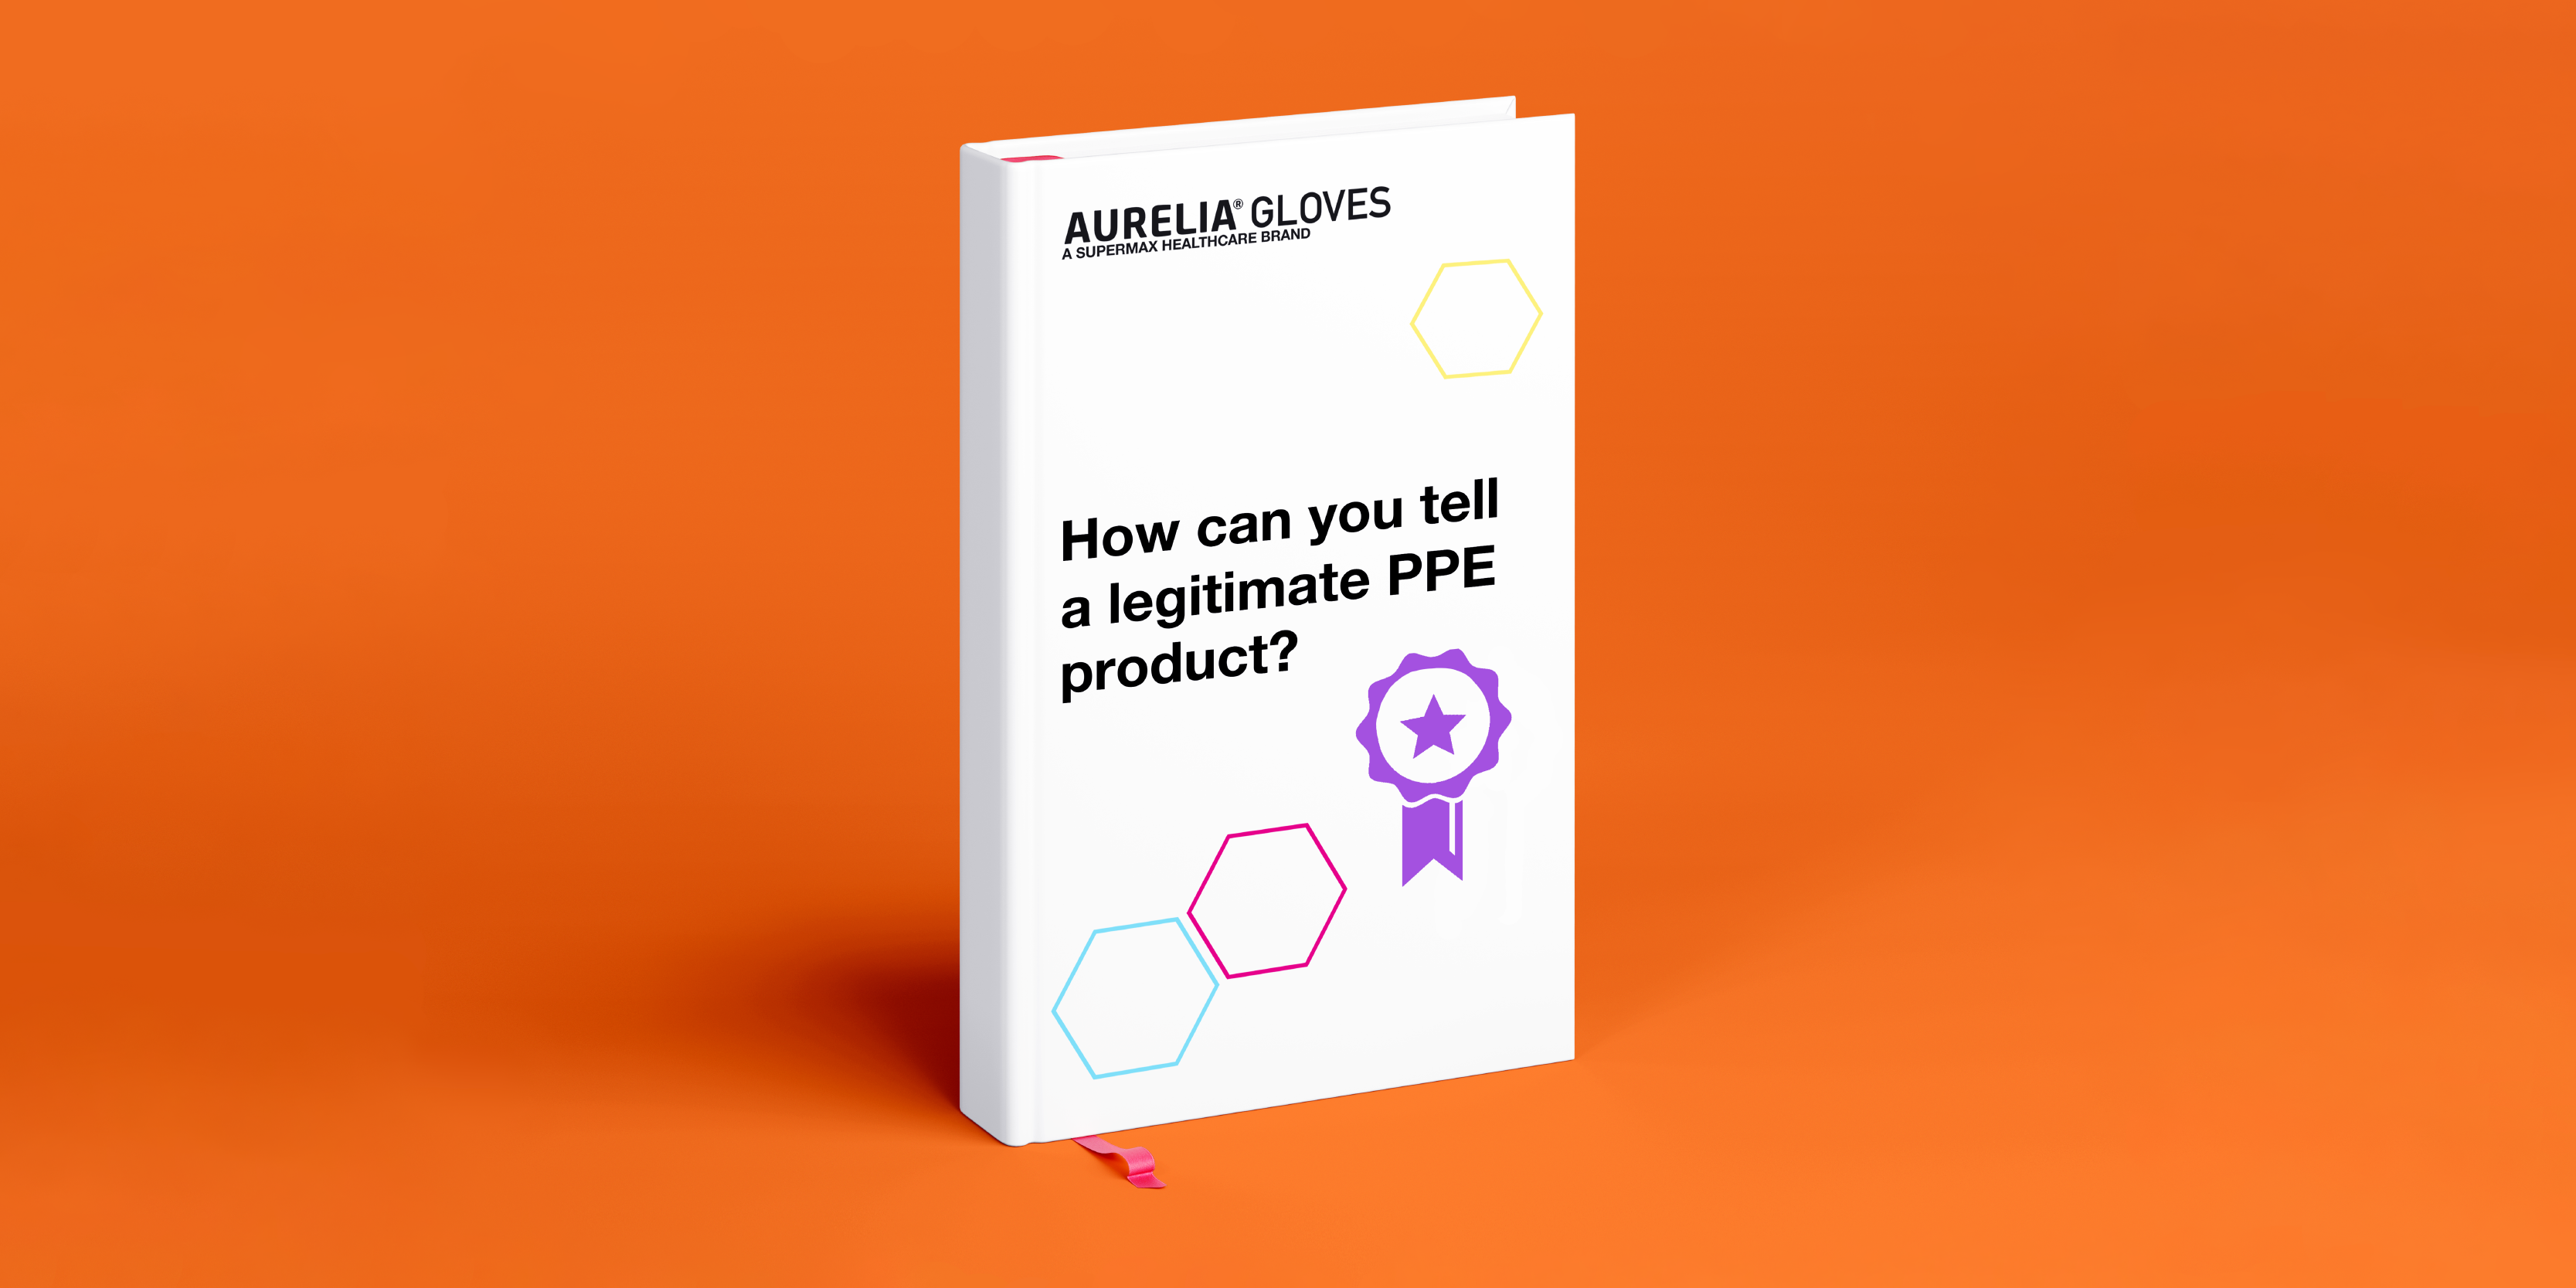 How can you tell a legitimate PPE product?